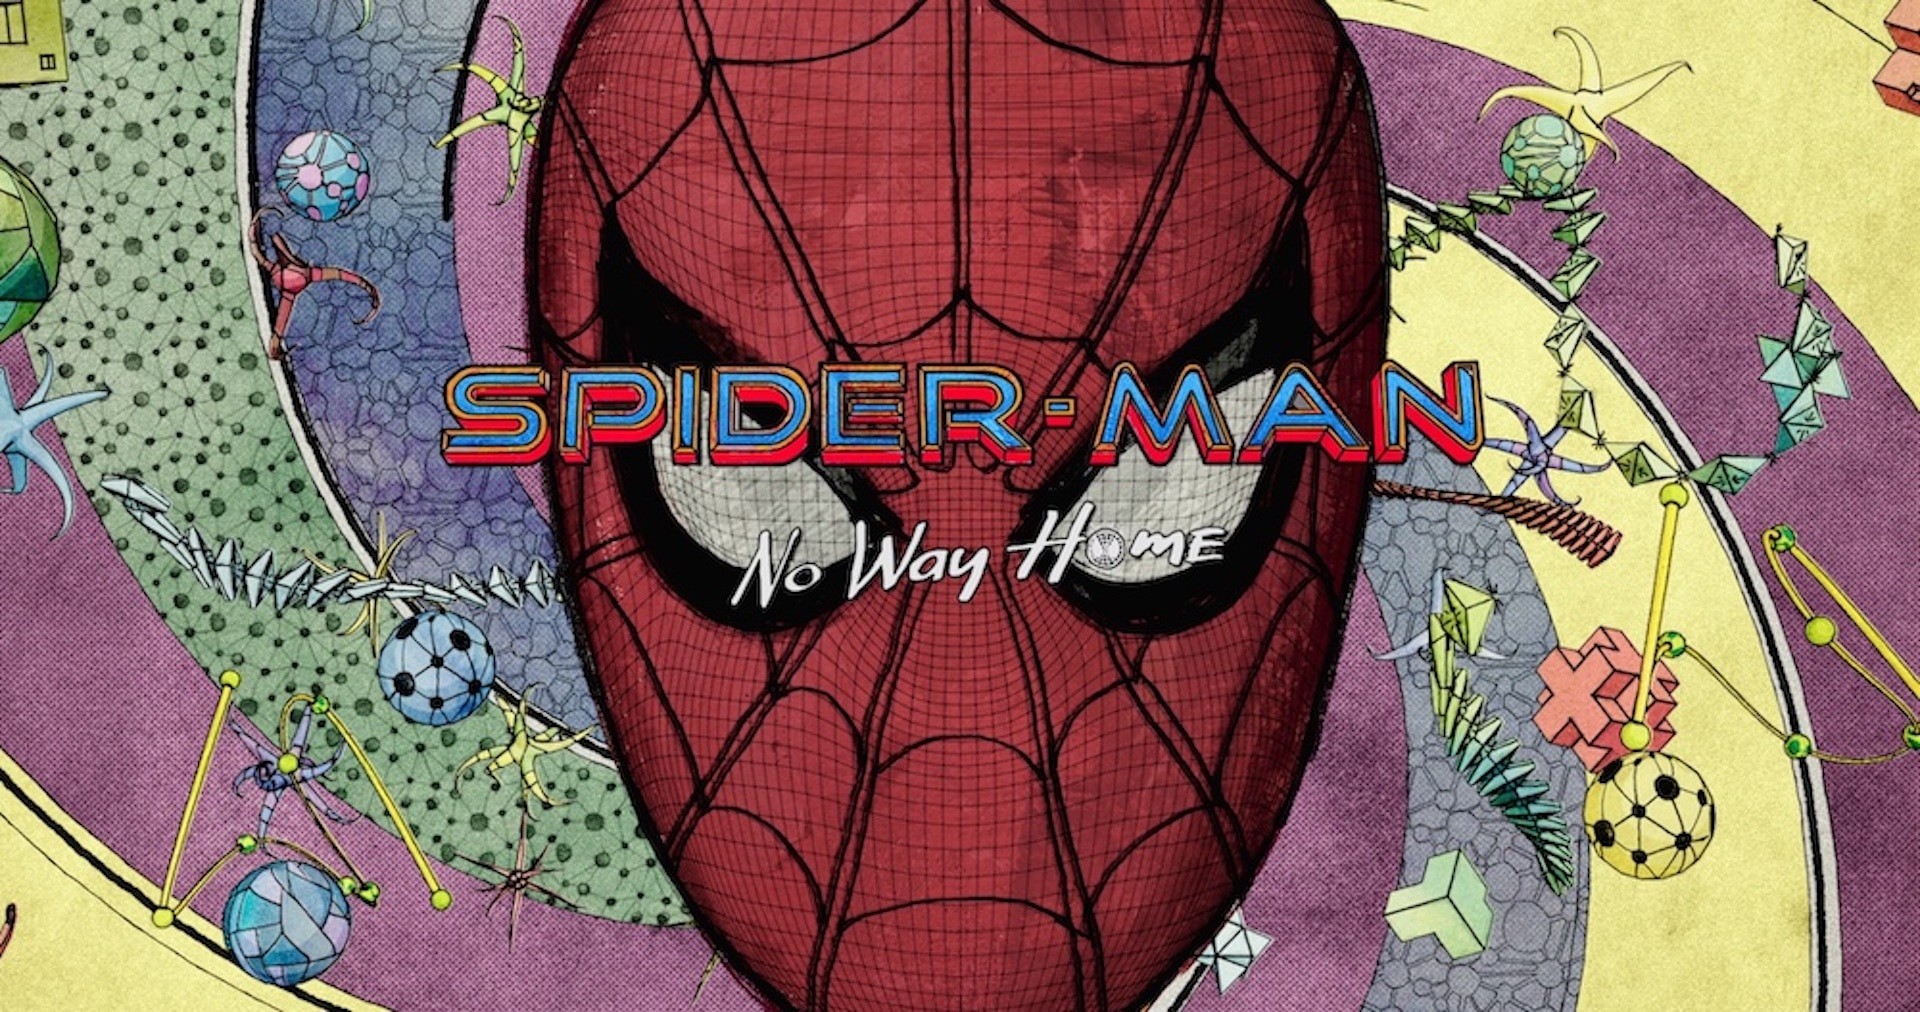 Spider-Man: No Way Home Ending Explained - What Now?